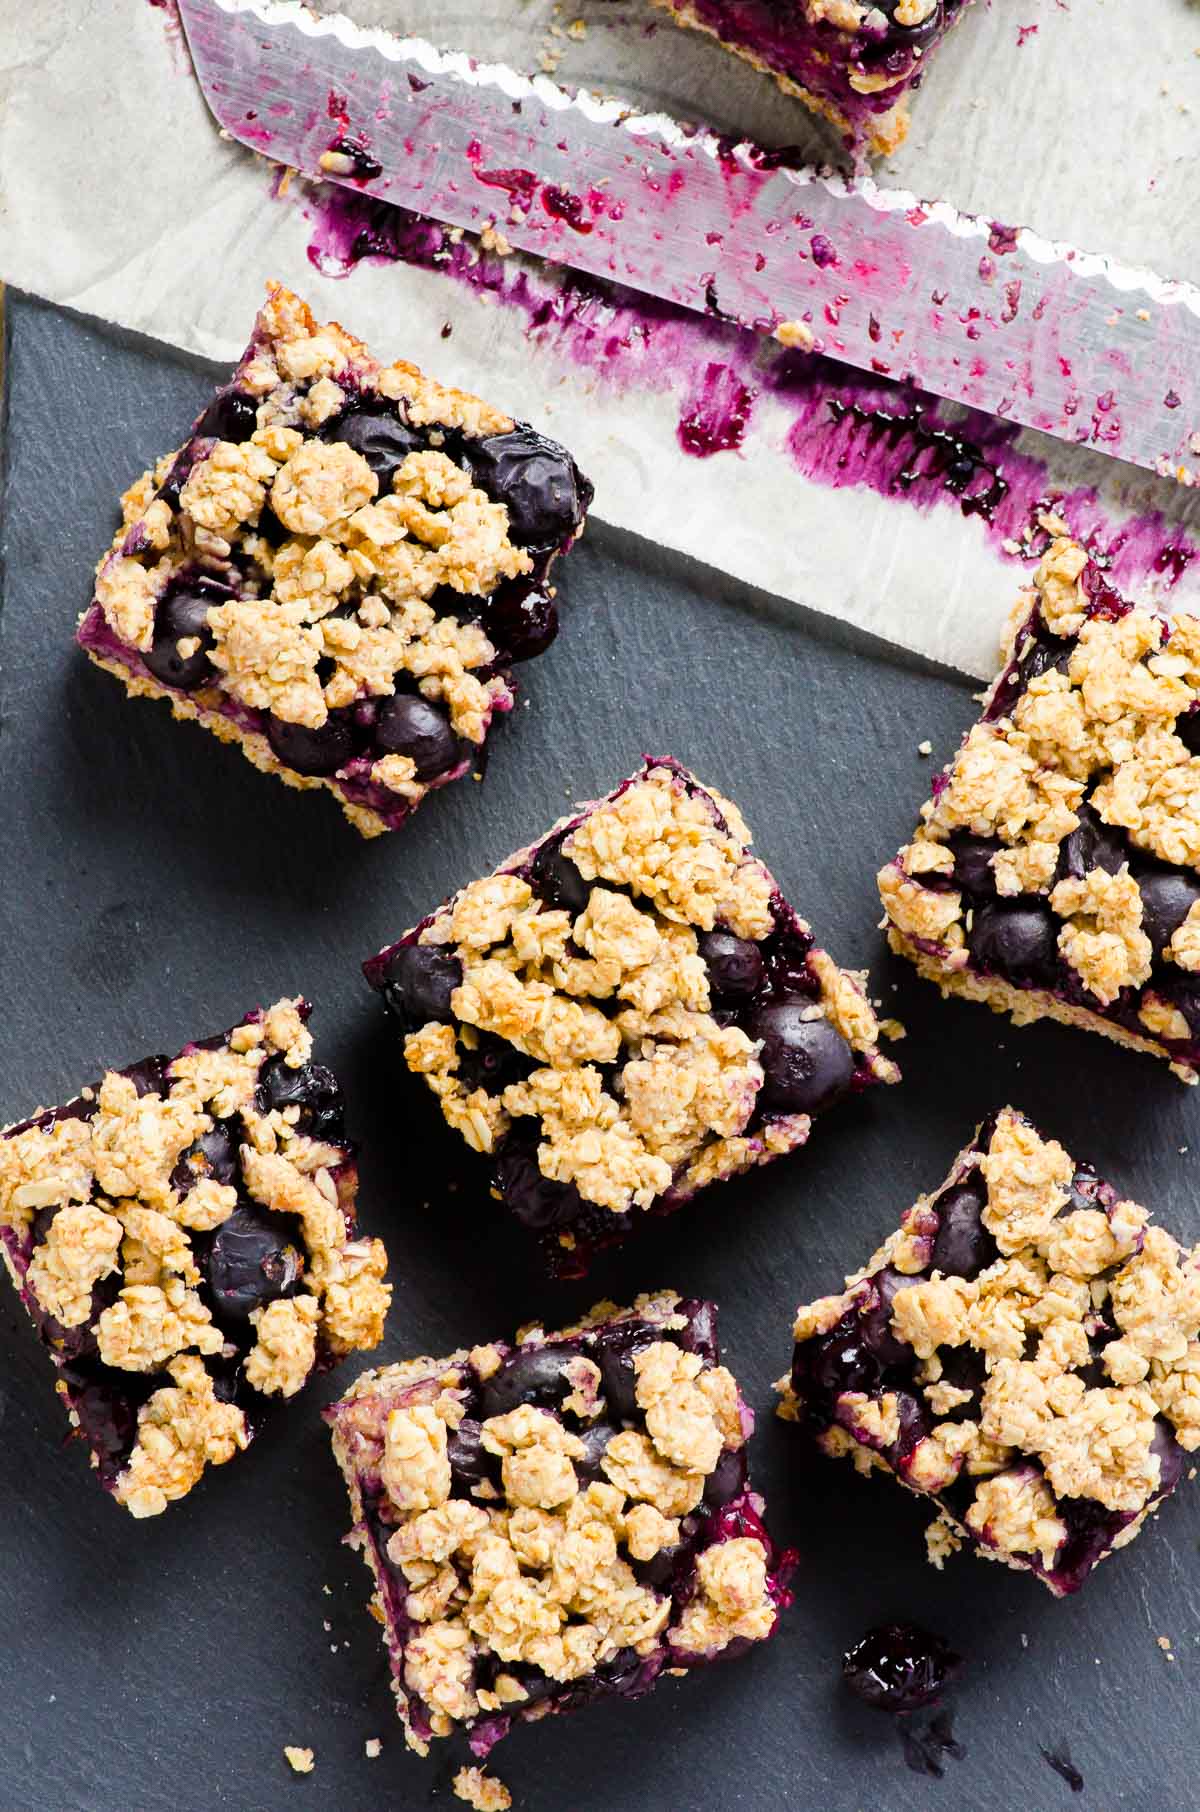 Iced blueberry oatmeal bars on black serving dish with a knife on parchment paper.